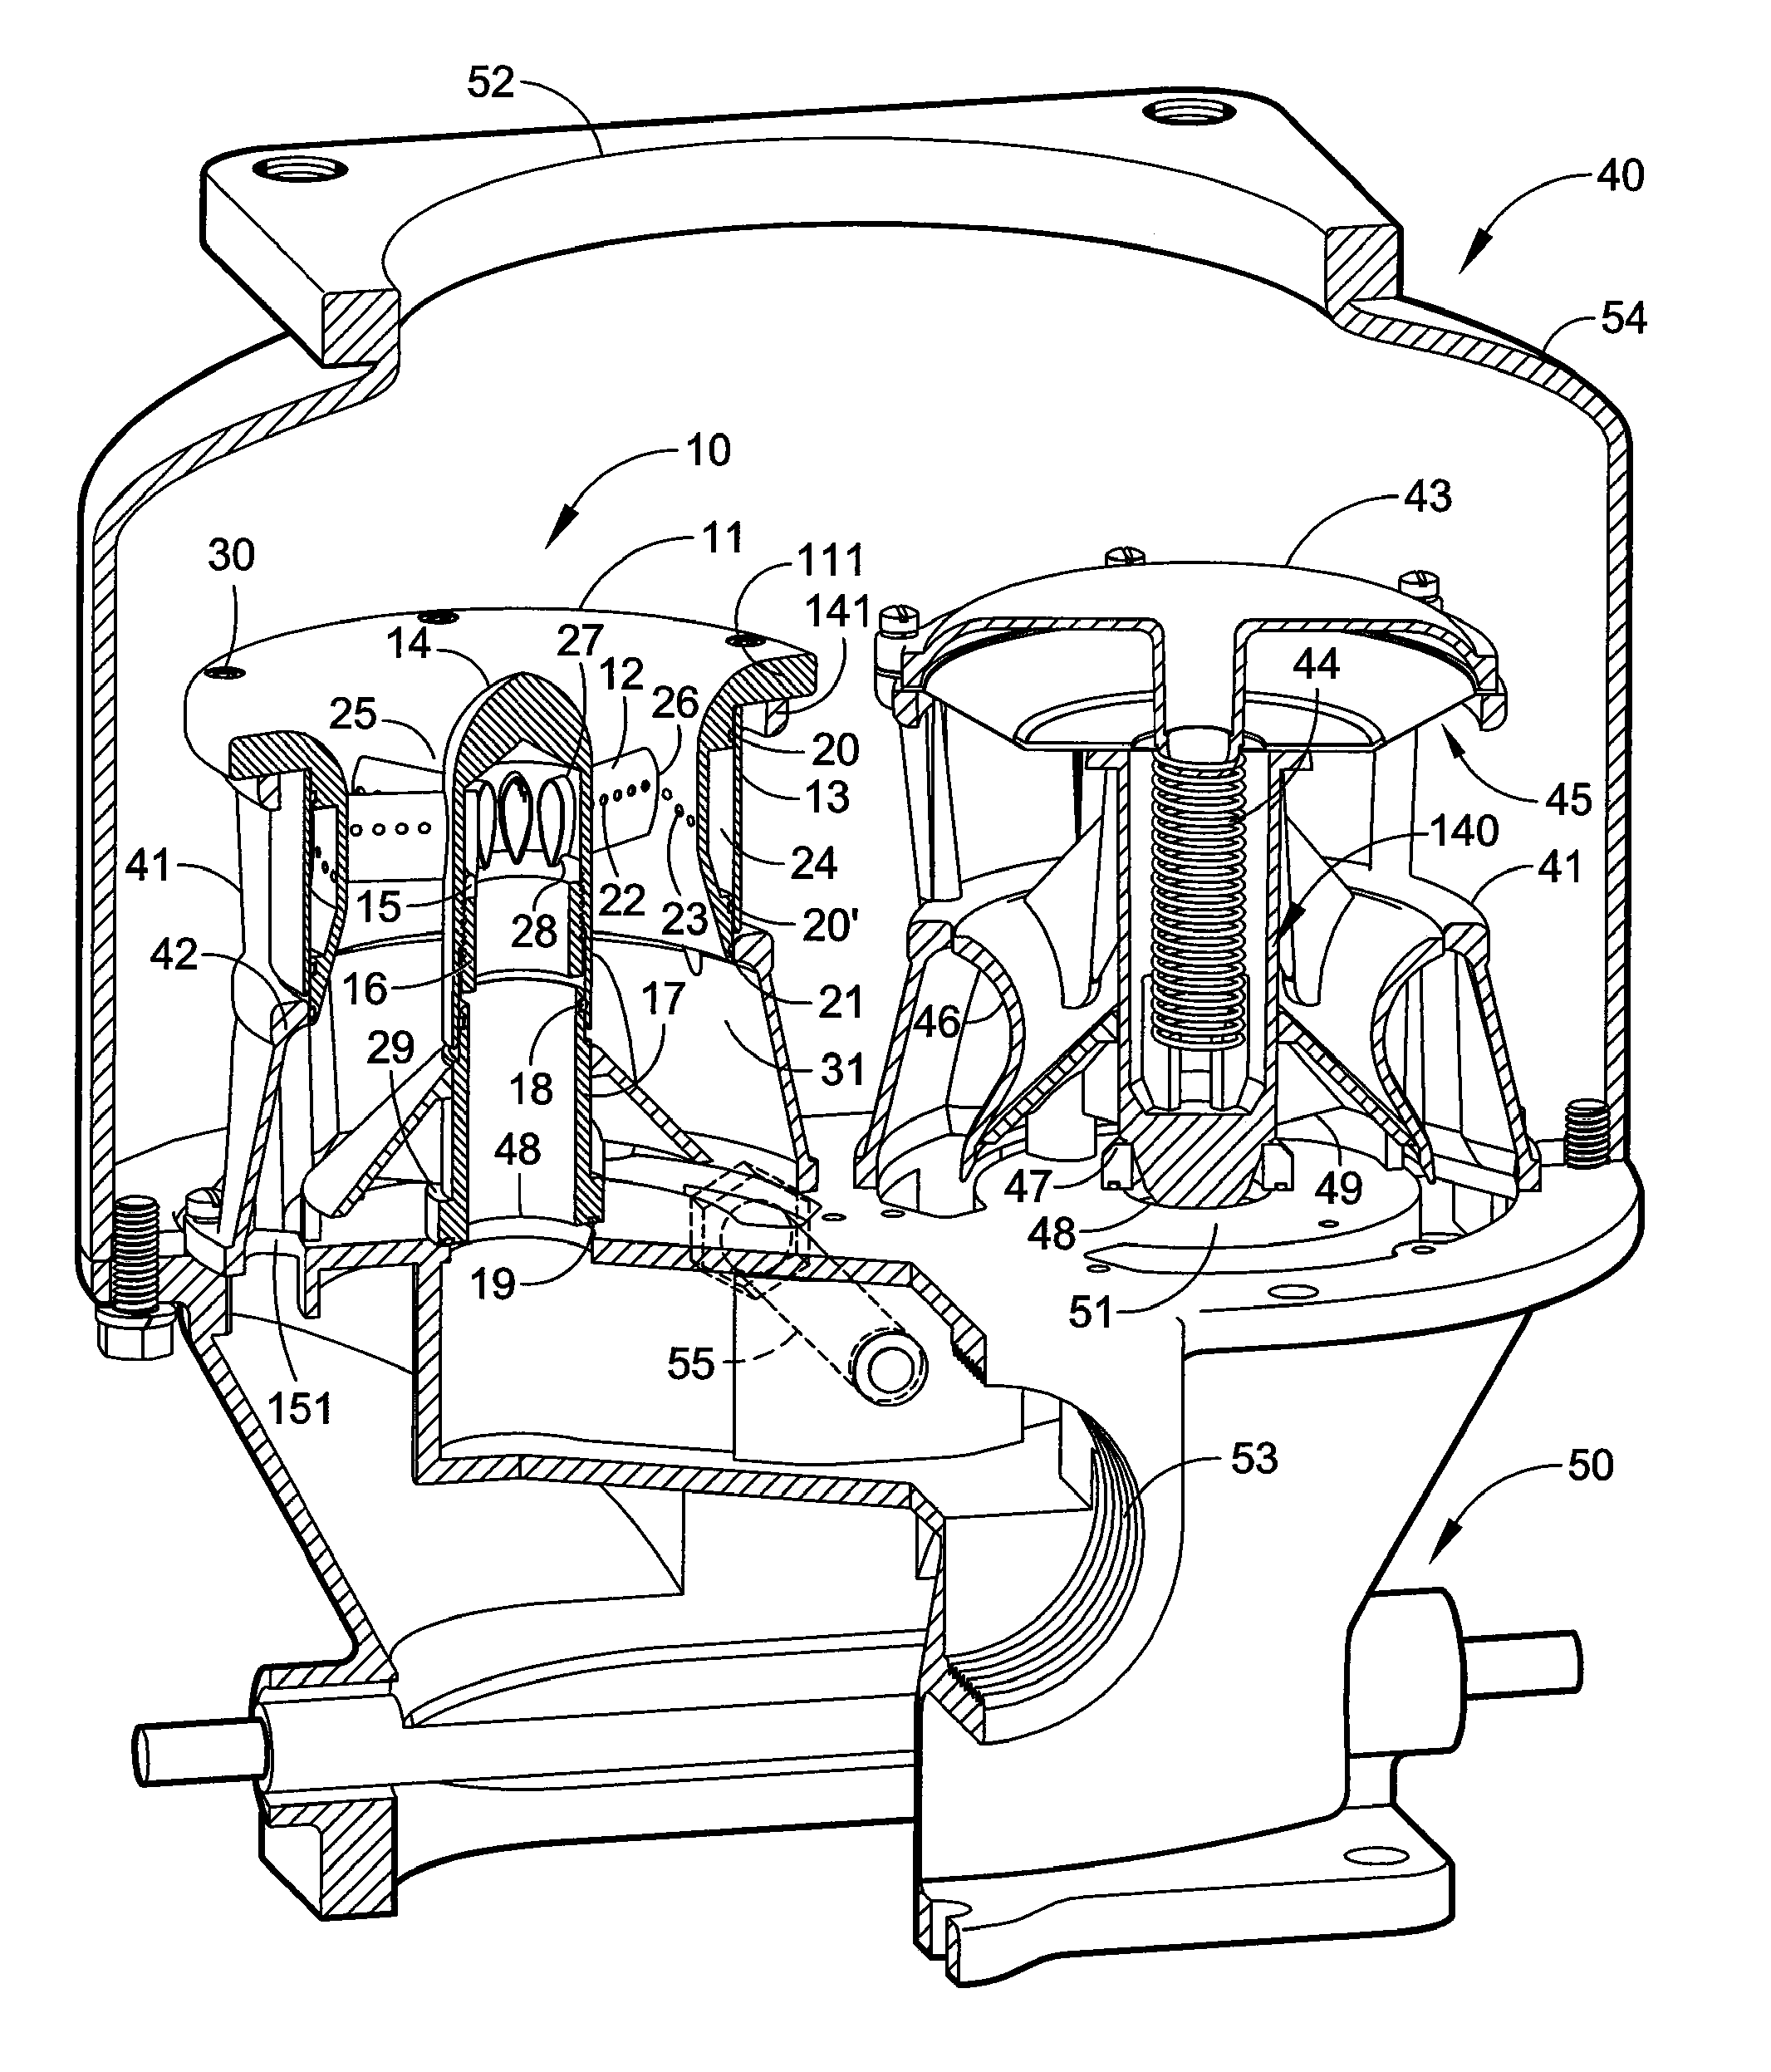 Gaseous fuel and air mixing venturi device and method for carburetor